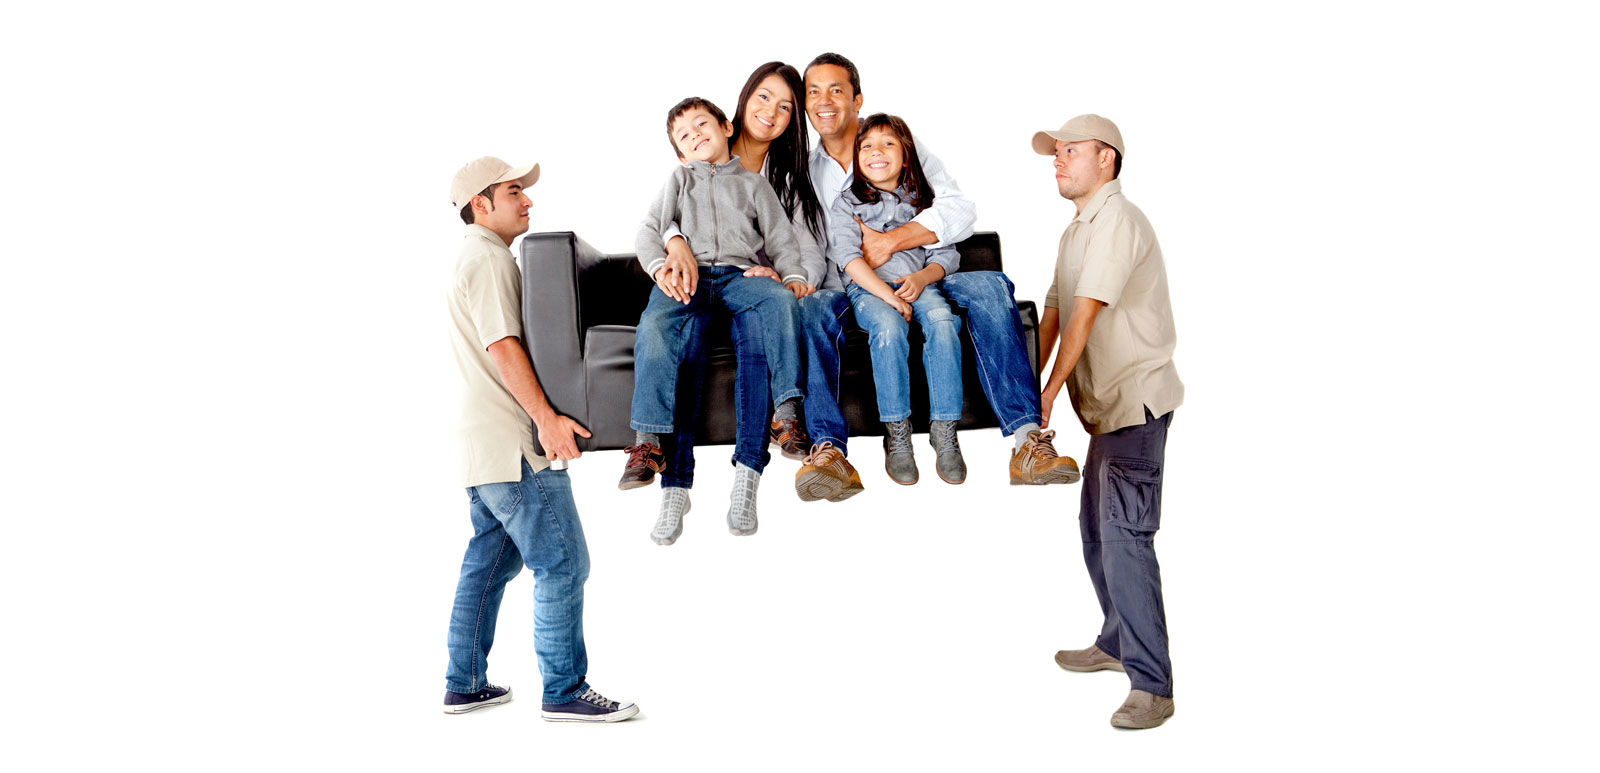 Moving Services Company in Plano TX